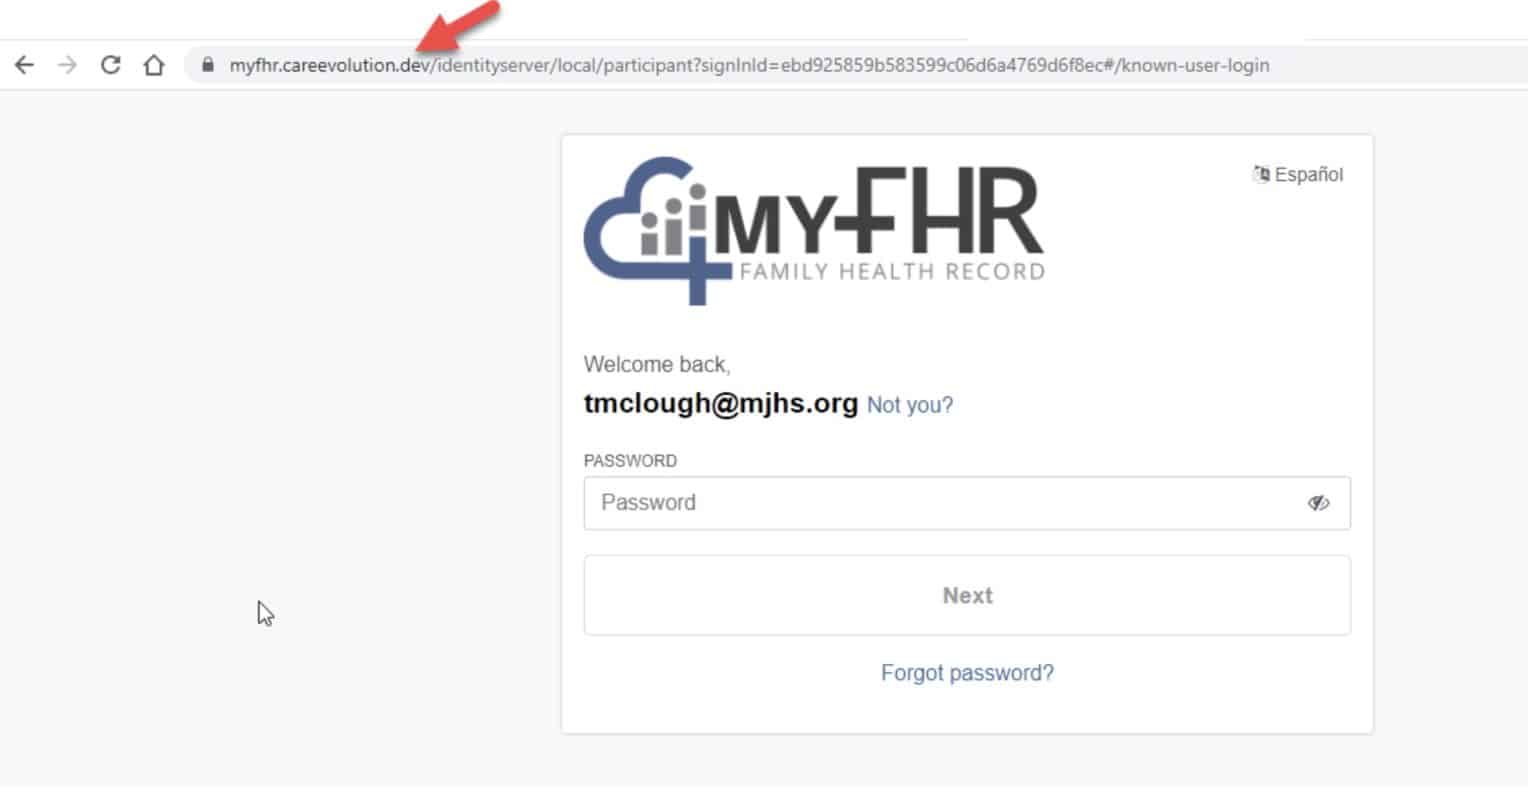 Screenshot of the myfhr.careevolution.com login screen with inputs for password and a next button